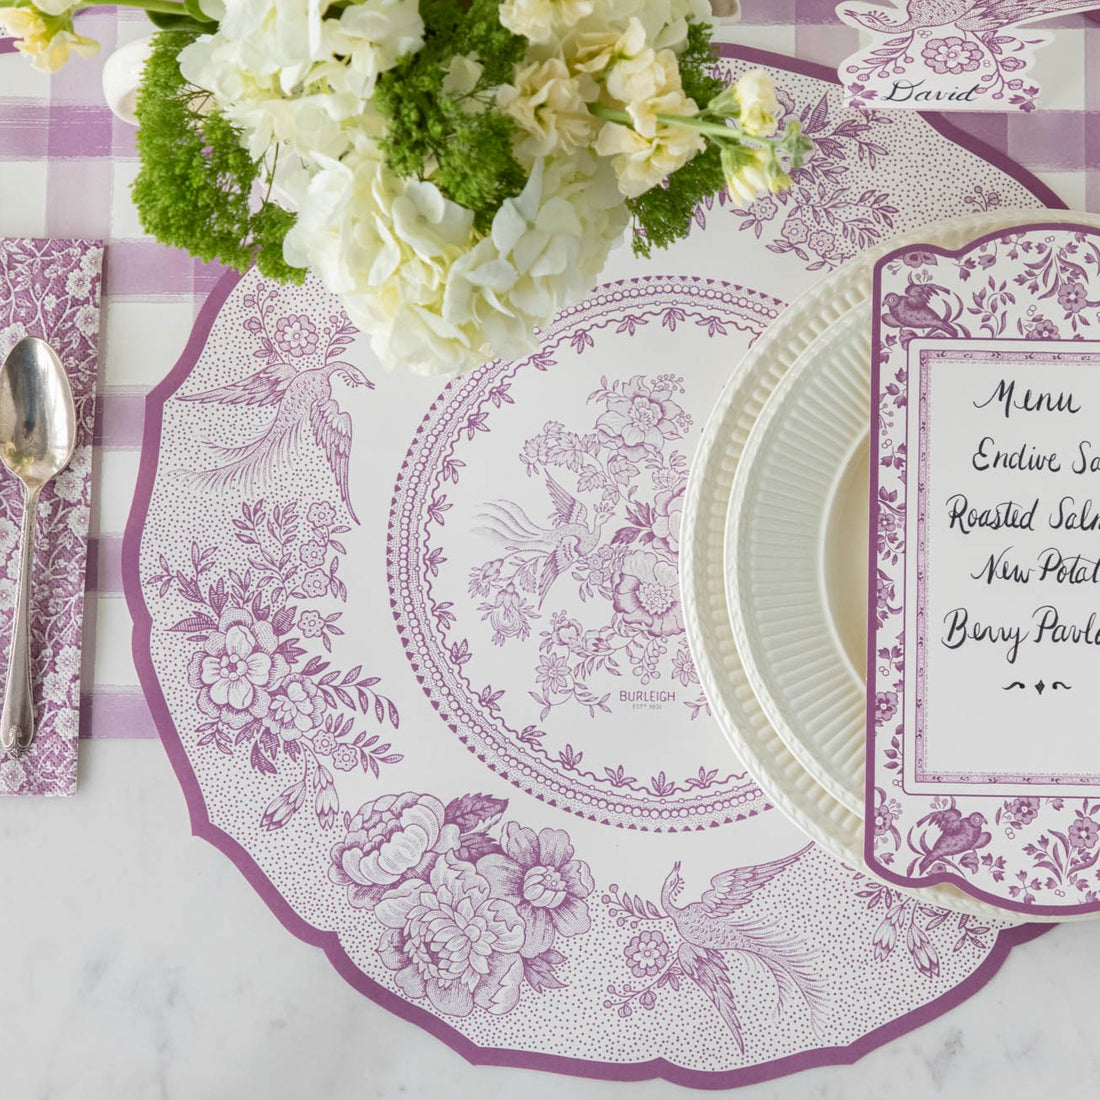 The Die-cut Lilac Asiatic Pheasants Placemat in an elegant place setting, from above.